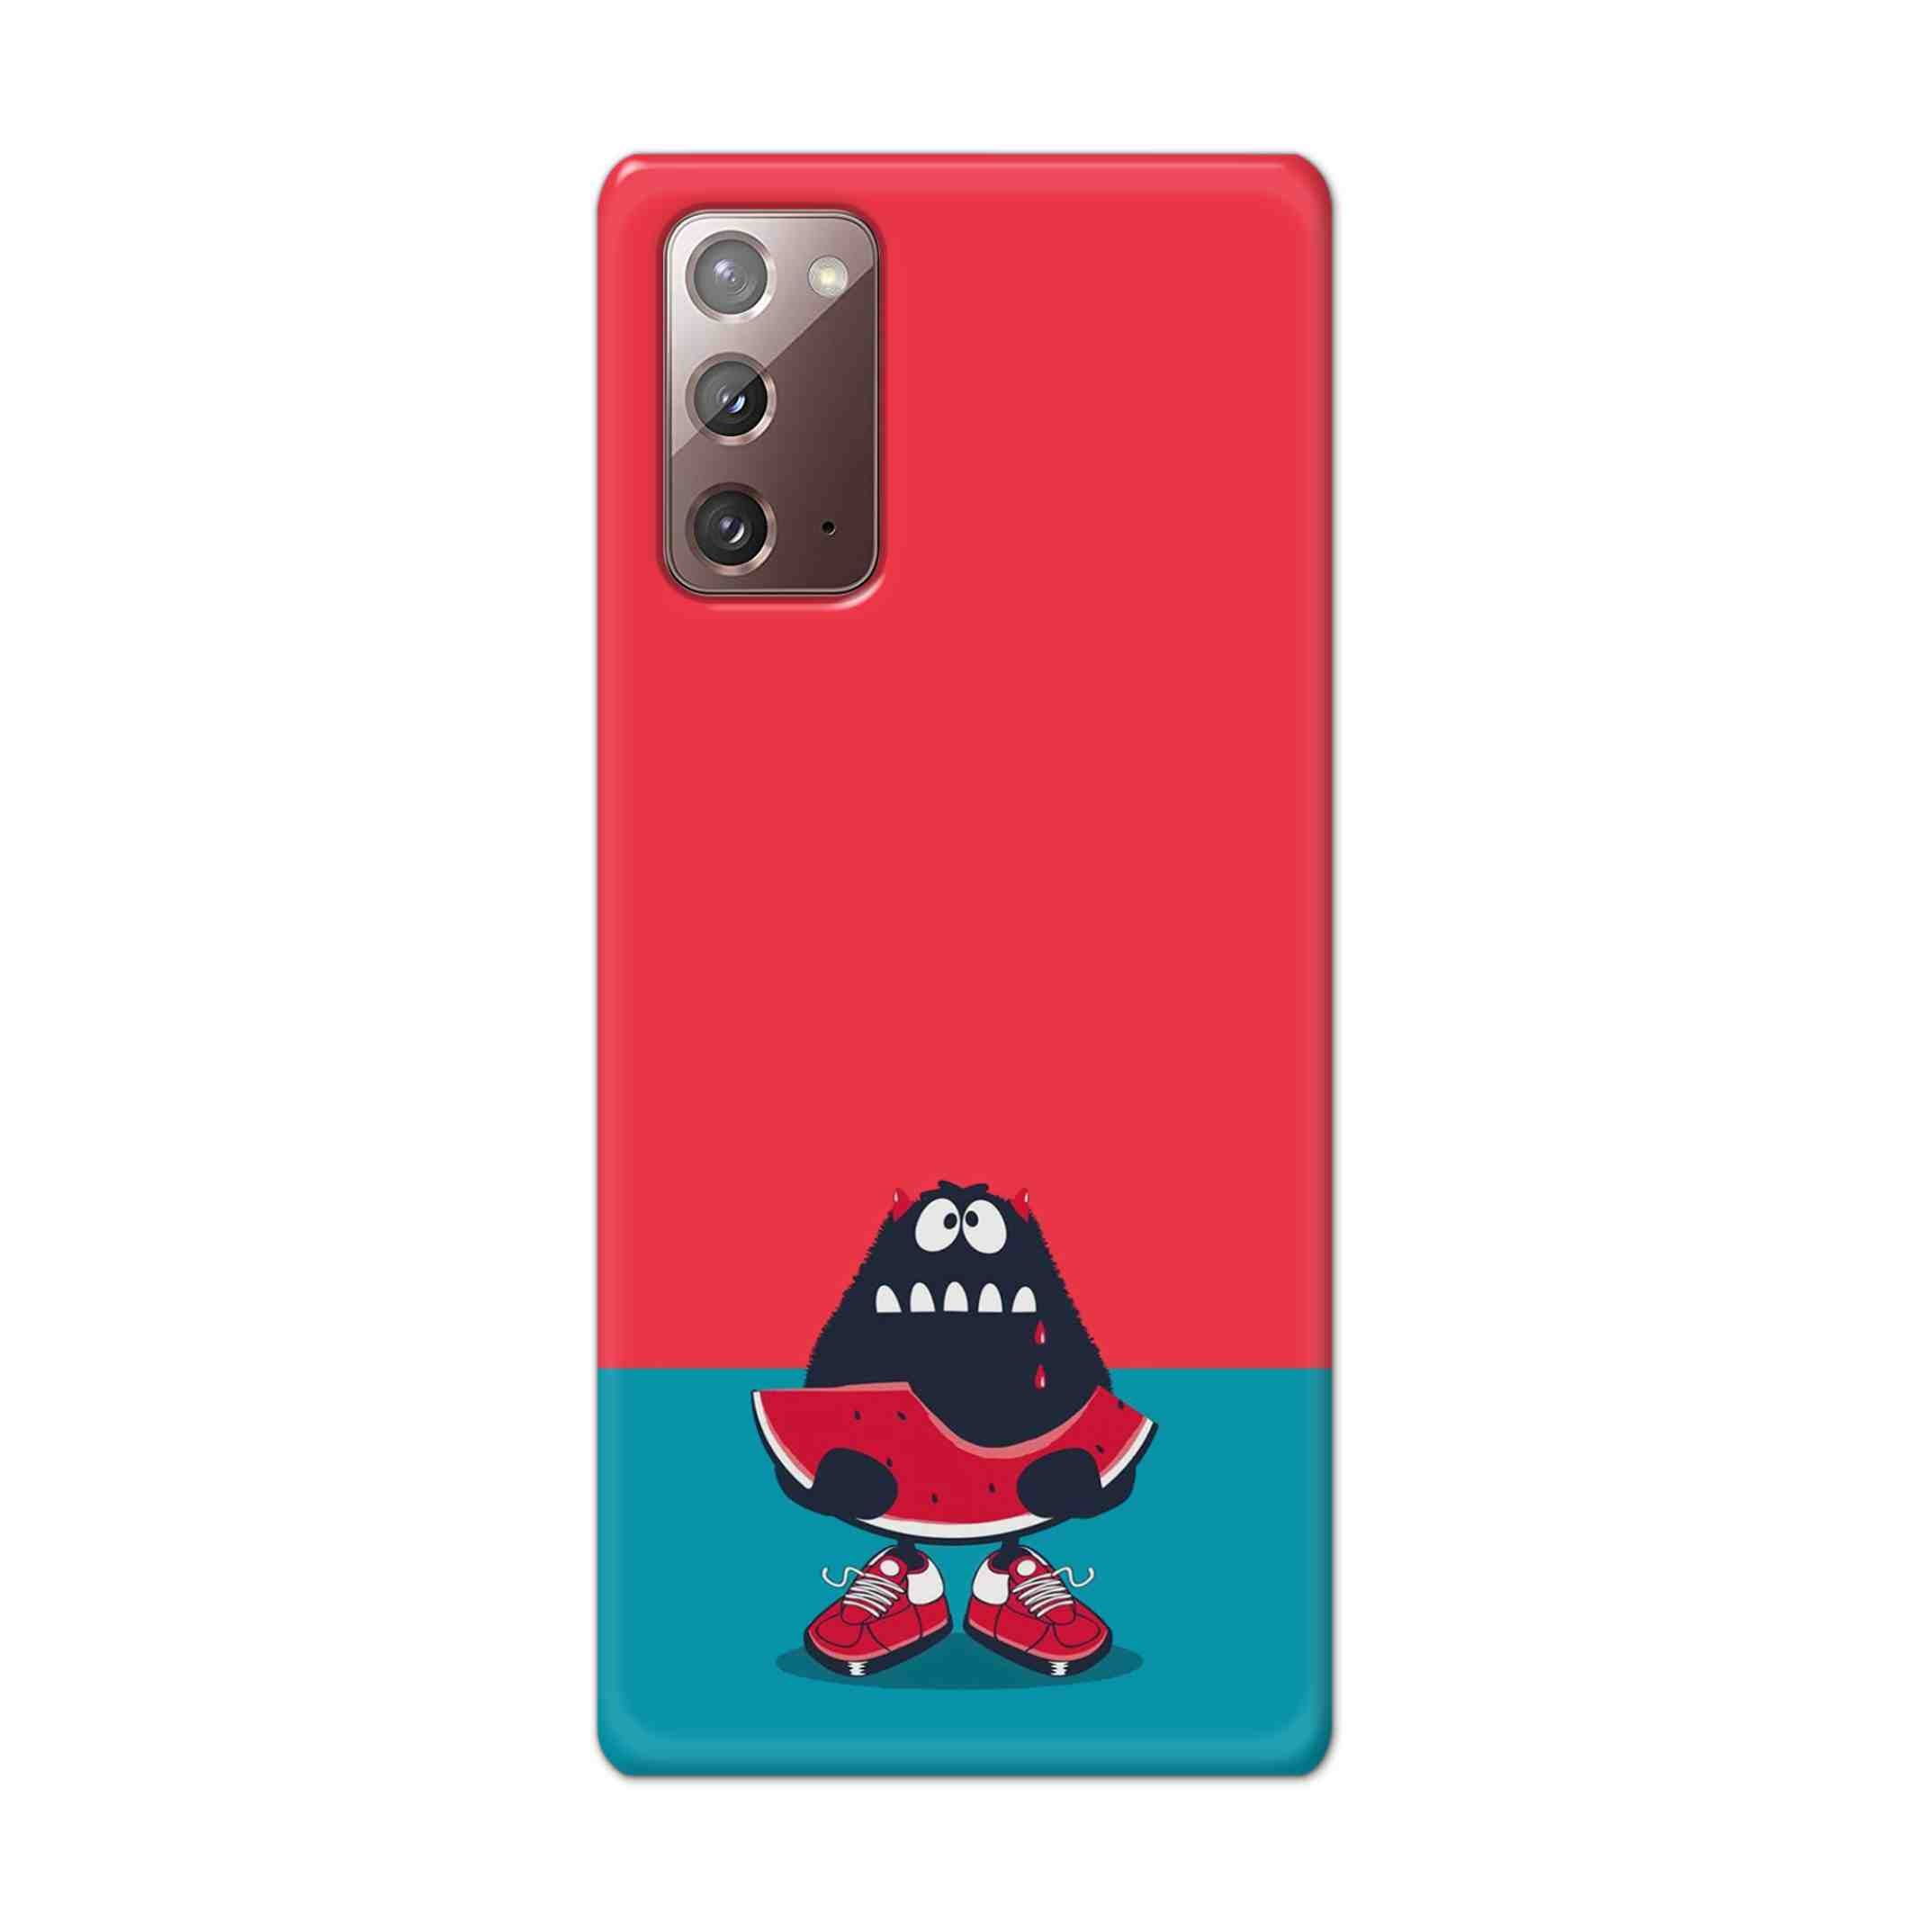 Buy Watermelon Hard Back Mobile Phone Case Cover For Samsung Galaxy Note 20 Online